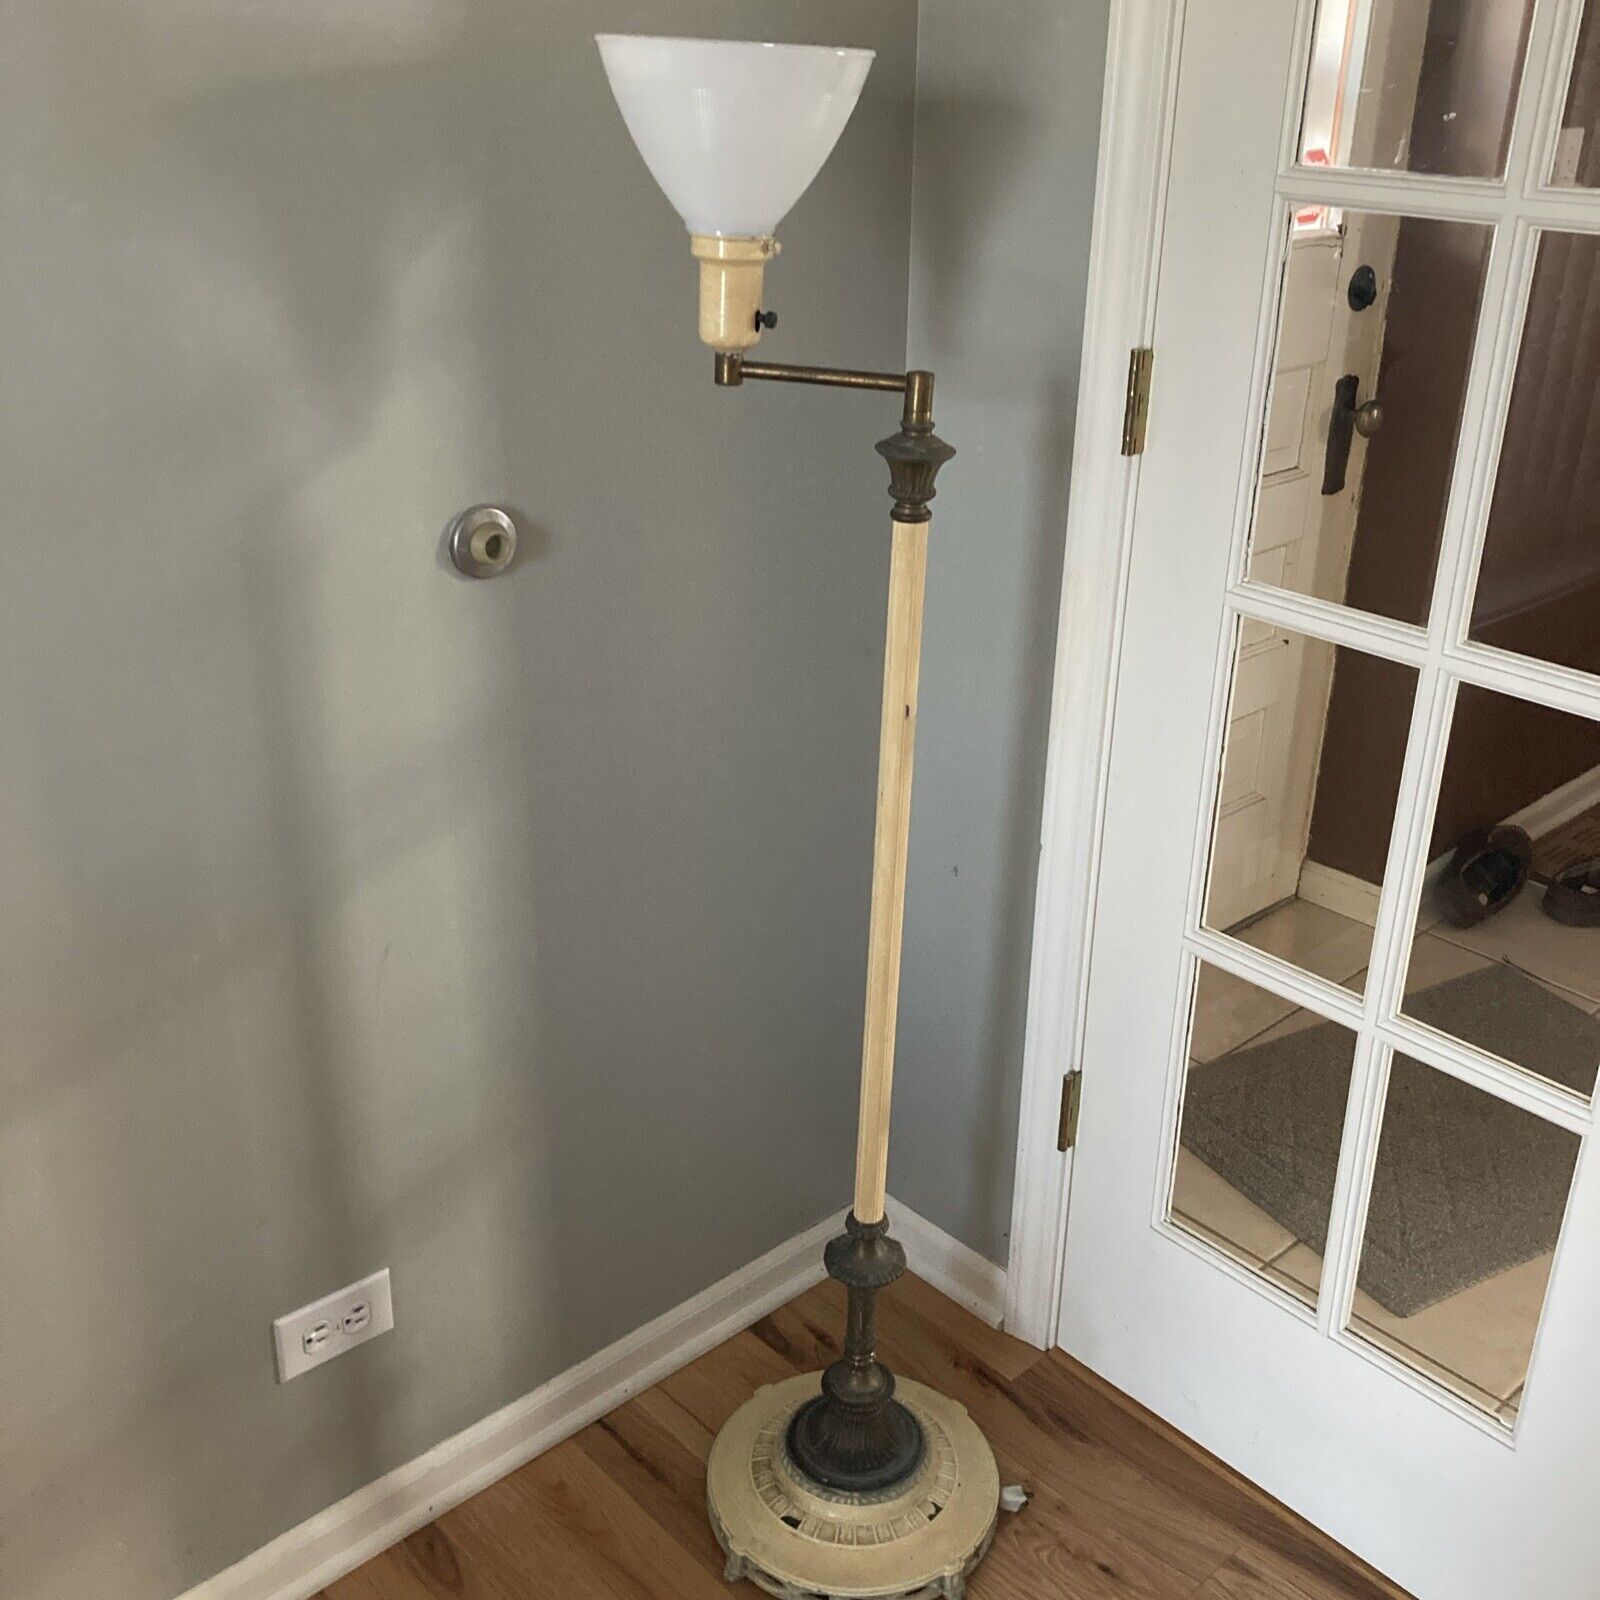 Antique Benjamin Cast Iron Base Floor Lamp W/ Retractable Cord* WORKS* SEE NOTES